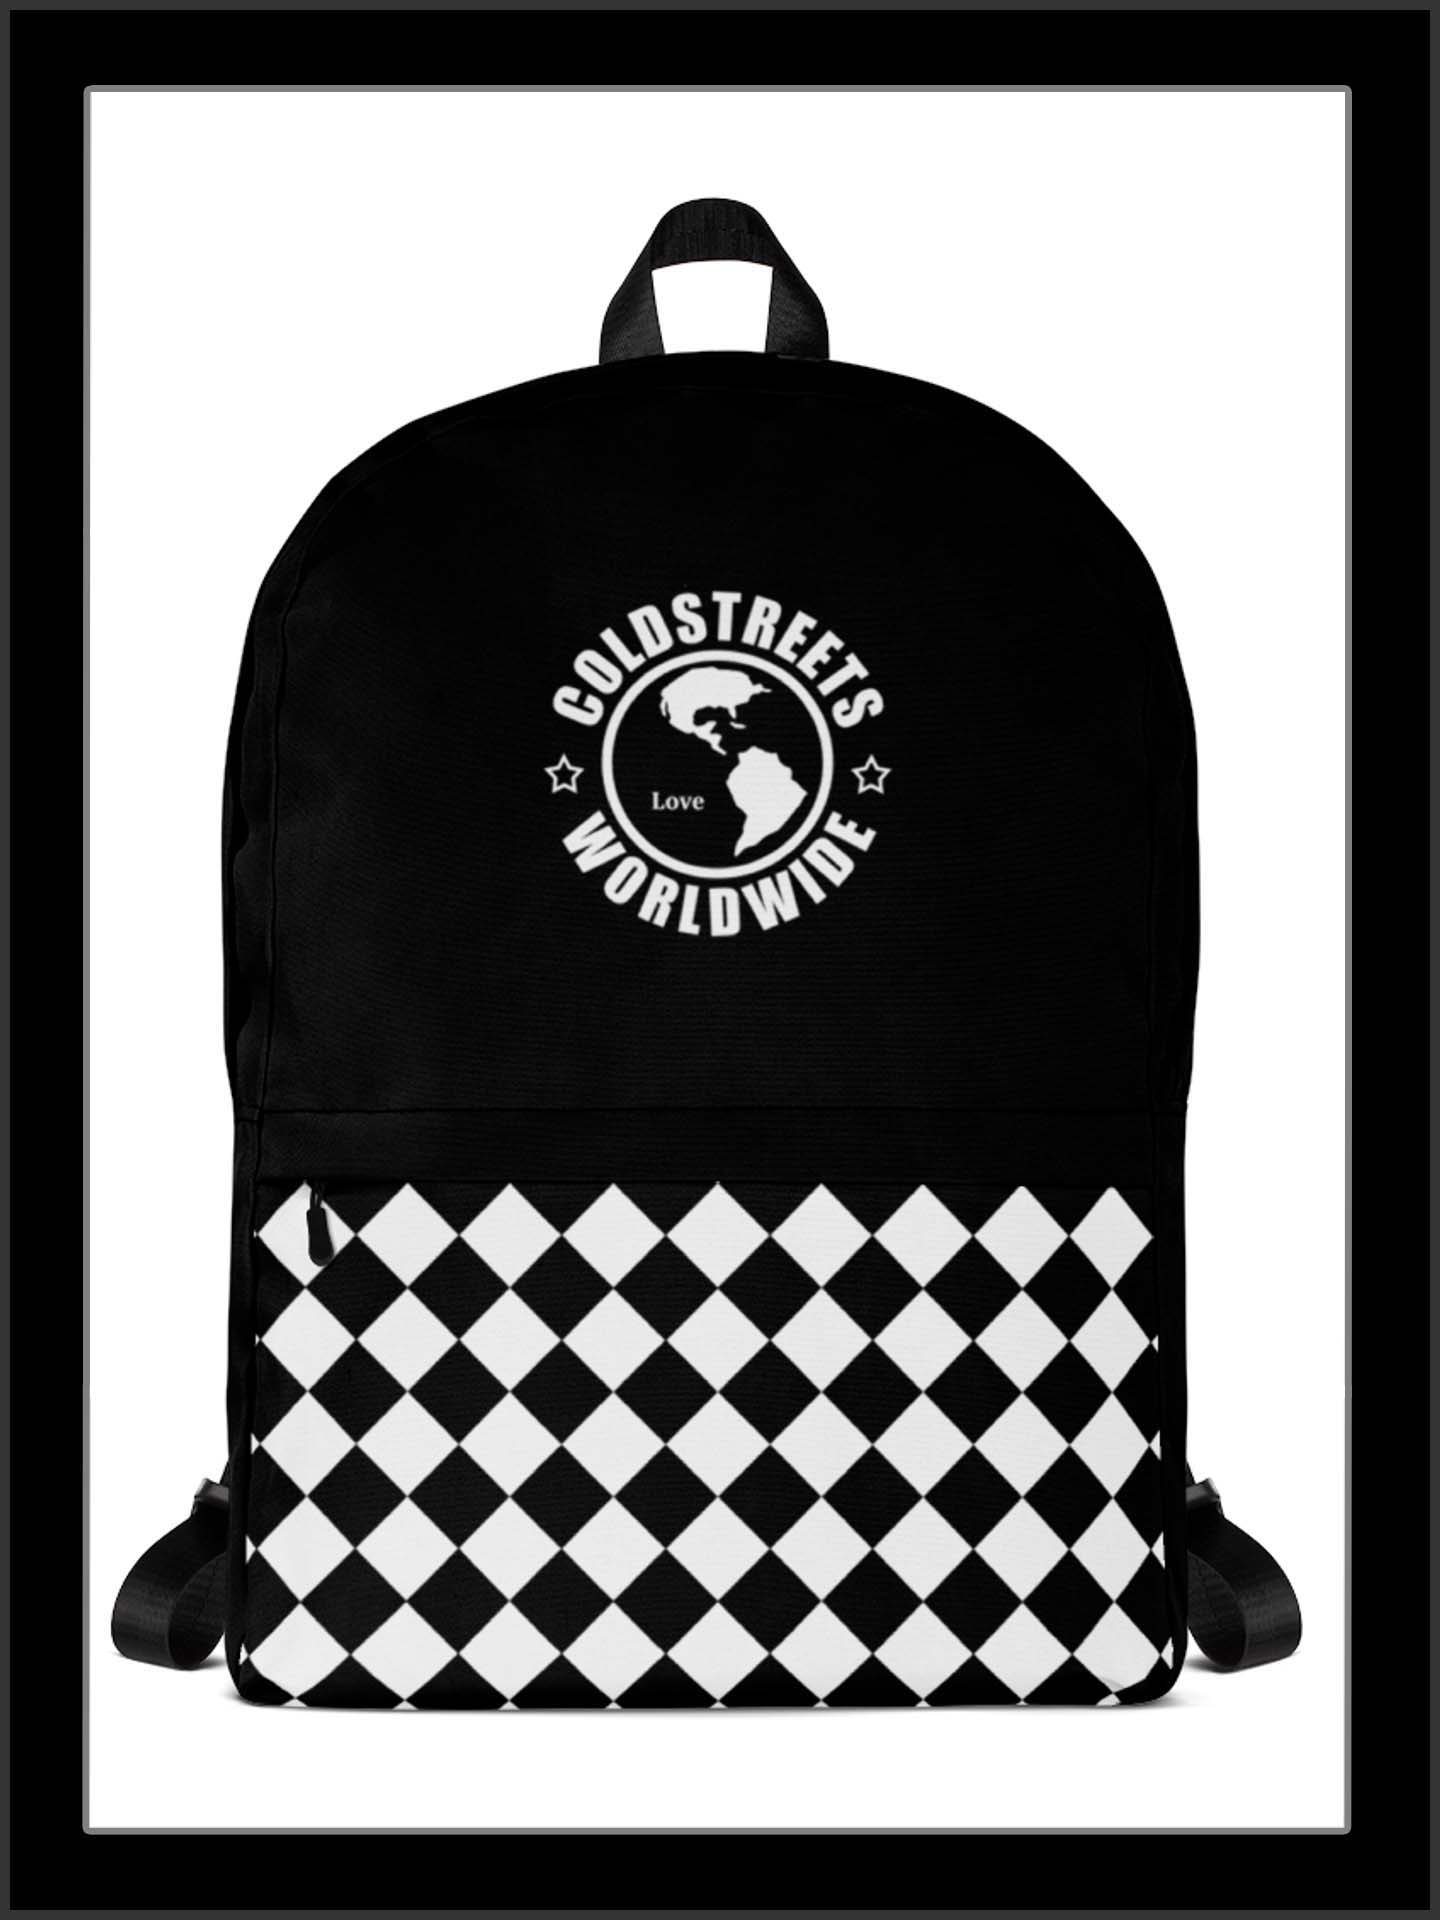 Cold Streets New York Backpacks